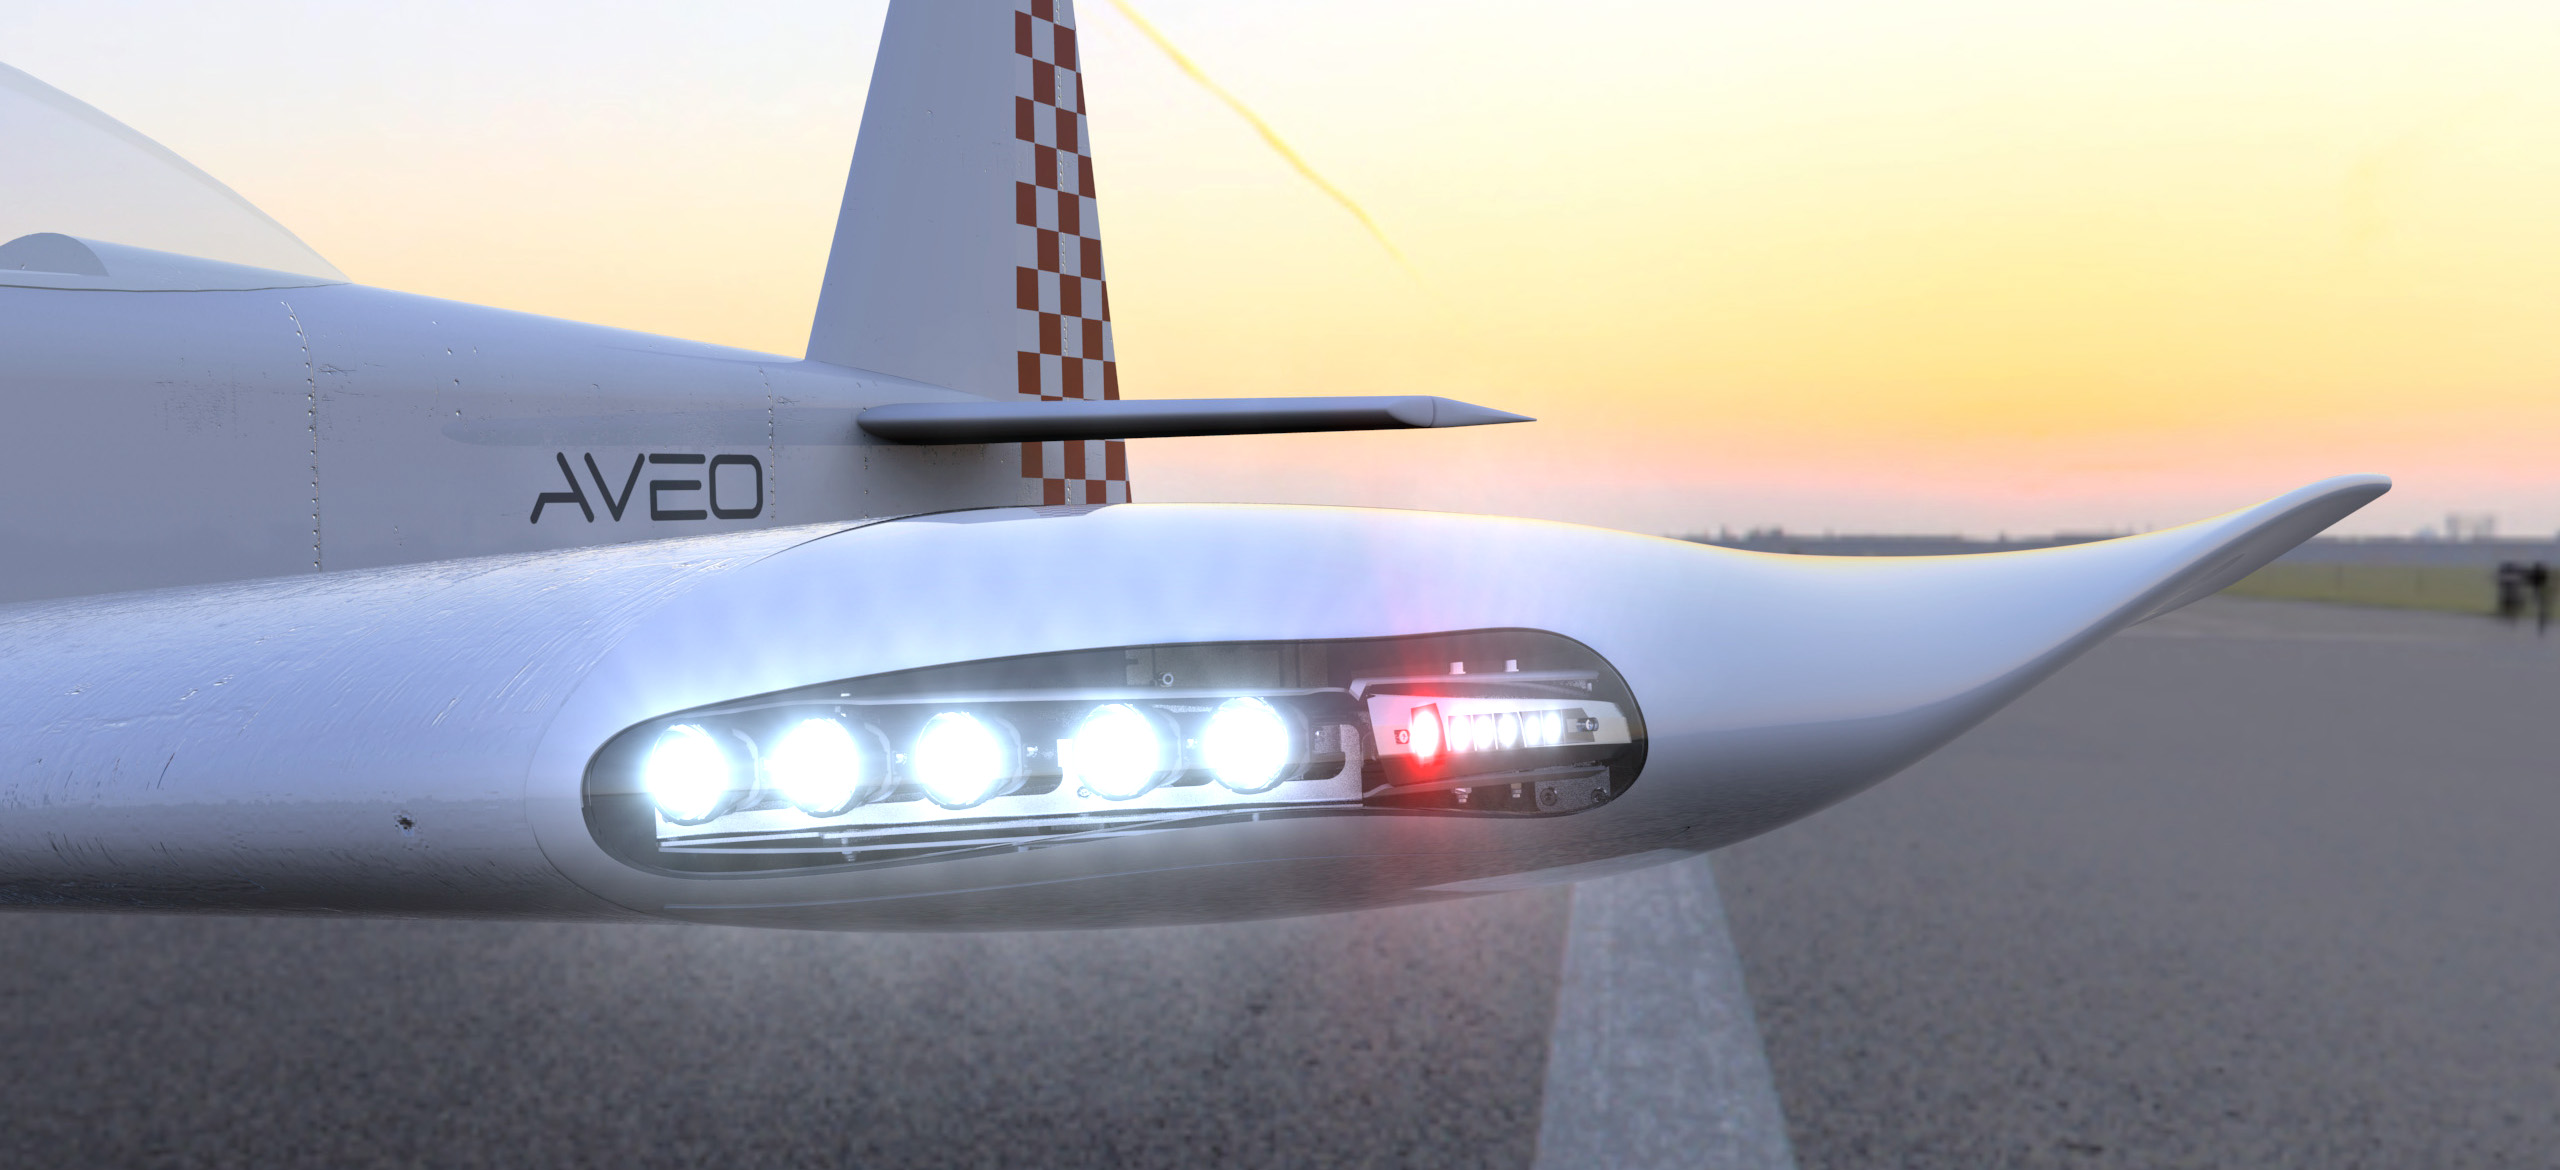 ZipTips Premiere - Winglets with integral conformal total lighting solution for VANS aircraft